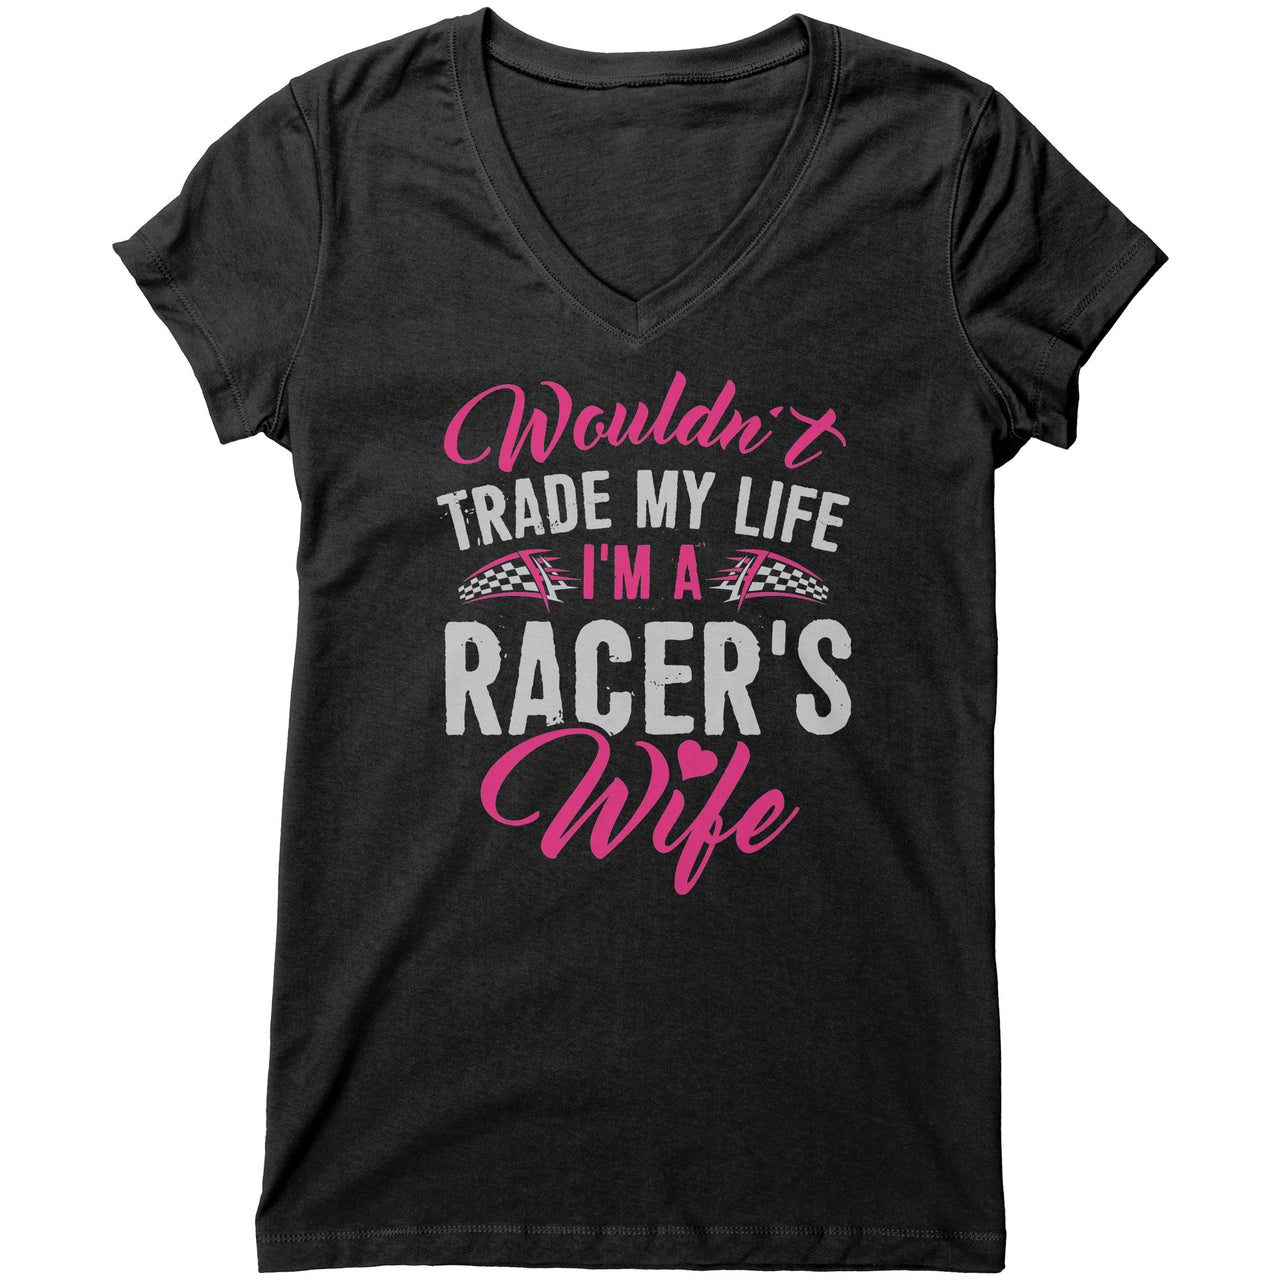 Wouldn't Trade My Life I'm A Racer's Wife Tees